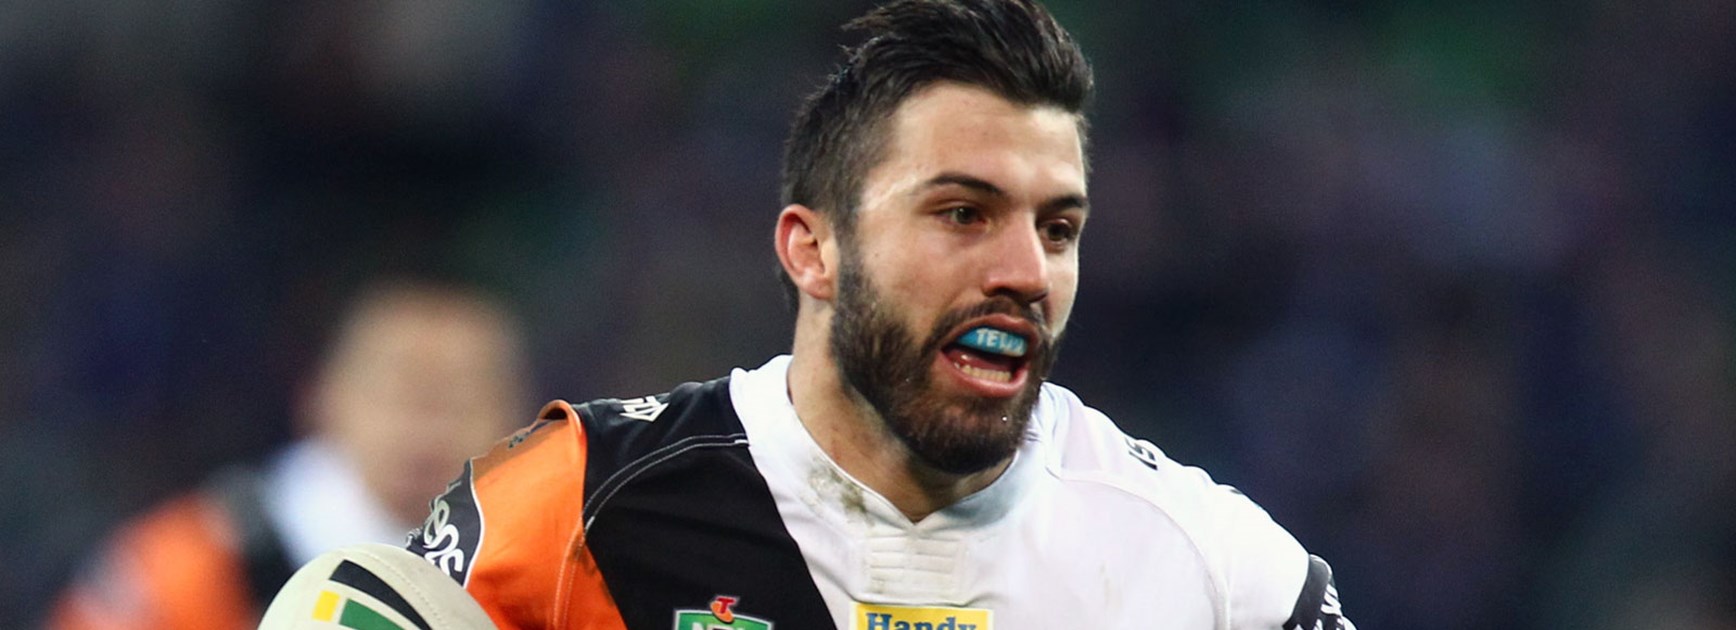 Wests Tigers teammates believe James Tedesco should be in the NSW side for Origin III.